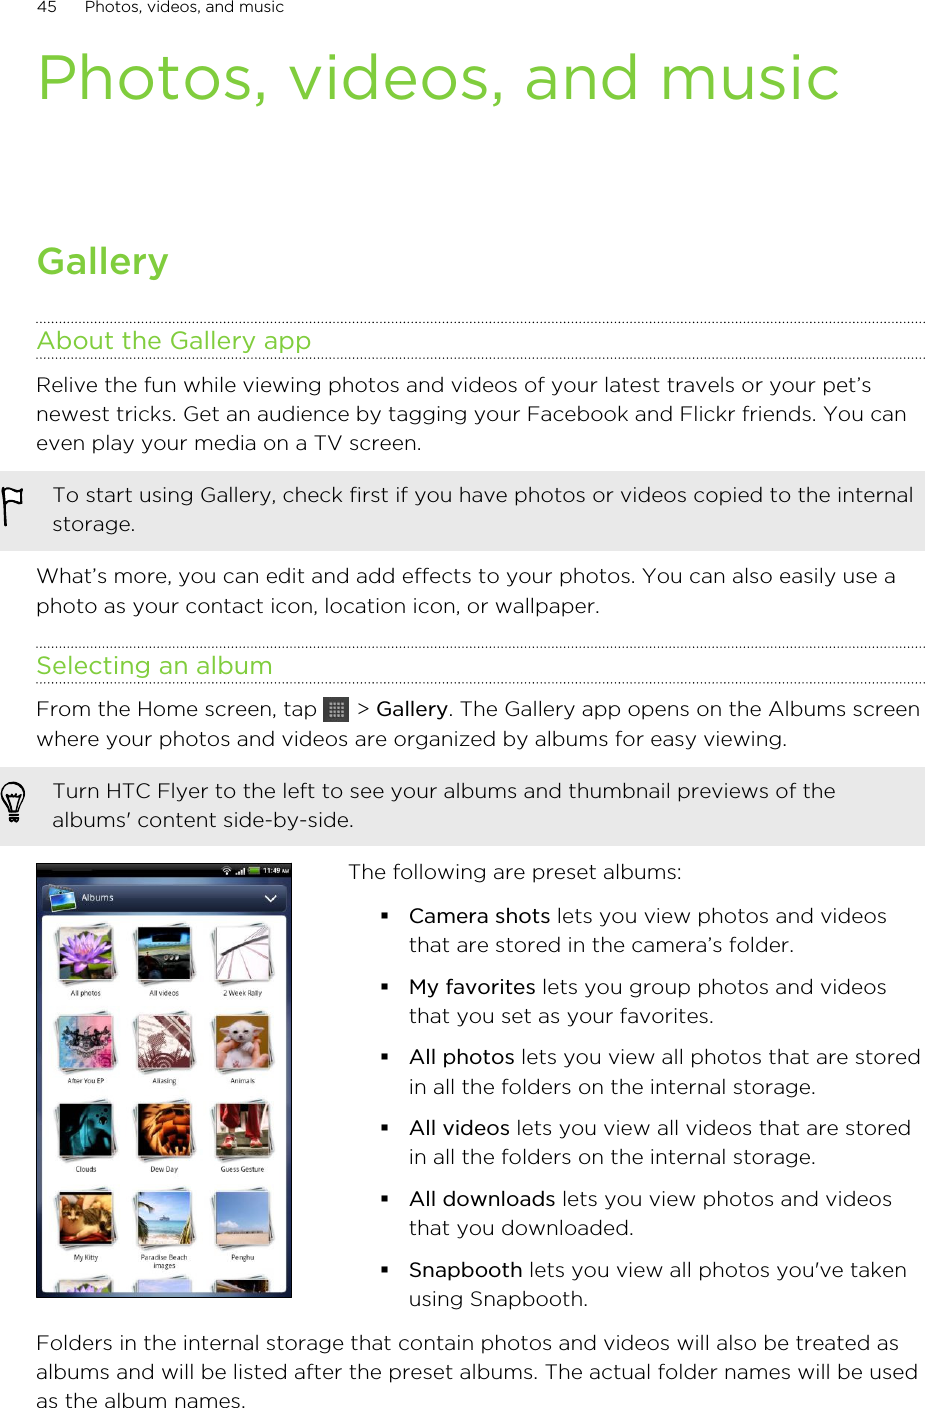 Photos, videos, and musicGalleryAbout the Gallery appRelive the fun while viewing photos and videos of your latest travels or your pet’snewest tricks. Get an audience by tagging your Facebook and Flickr friends. You caneven play your media on a TV screen.To start using Gallery, check first if you have photos or videos copied to the internalstorage.What’s more, you can edit and add effects to your photos. You can also easily use aphoto as your contact icon, location icon, or wallpaper.Selecting an albumFrom the Home screen, tap   &gt; Gallery. The Gallery app opens on the Albums screenwhere your photos and videos are organized by albums for easy viewing.Turn HTC Flyer to the left to see your albums and thumbnail previews of thealbums&apos; content side-by-side.The following are preset albums:§Camera shots lets you view photos and videosthat are stored in the camera’s folder.§My favorites lets you group photos and videosthat you set as your favorites.§All photos lets you view all photos that are storedin all the folders on the internal storage.§All videos lets you view all videos that are storedin all the folders on the internal storage.§All downloads lets you view photos and videosthat you downloaded.§Snapbooth lets you view all photos you&apos;ve takenusing Snapbooth.Folders in the internal storage that contain photos and videos will also be treated asalbums and will be listed after the preset albums. The actual folder names will be usedas the album names.45 Photos, videos, and music